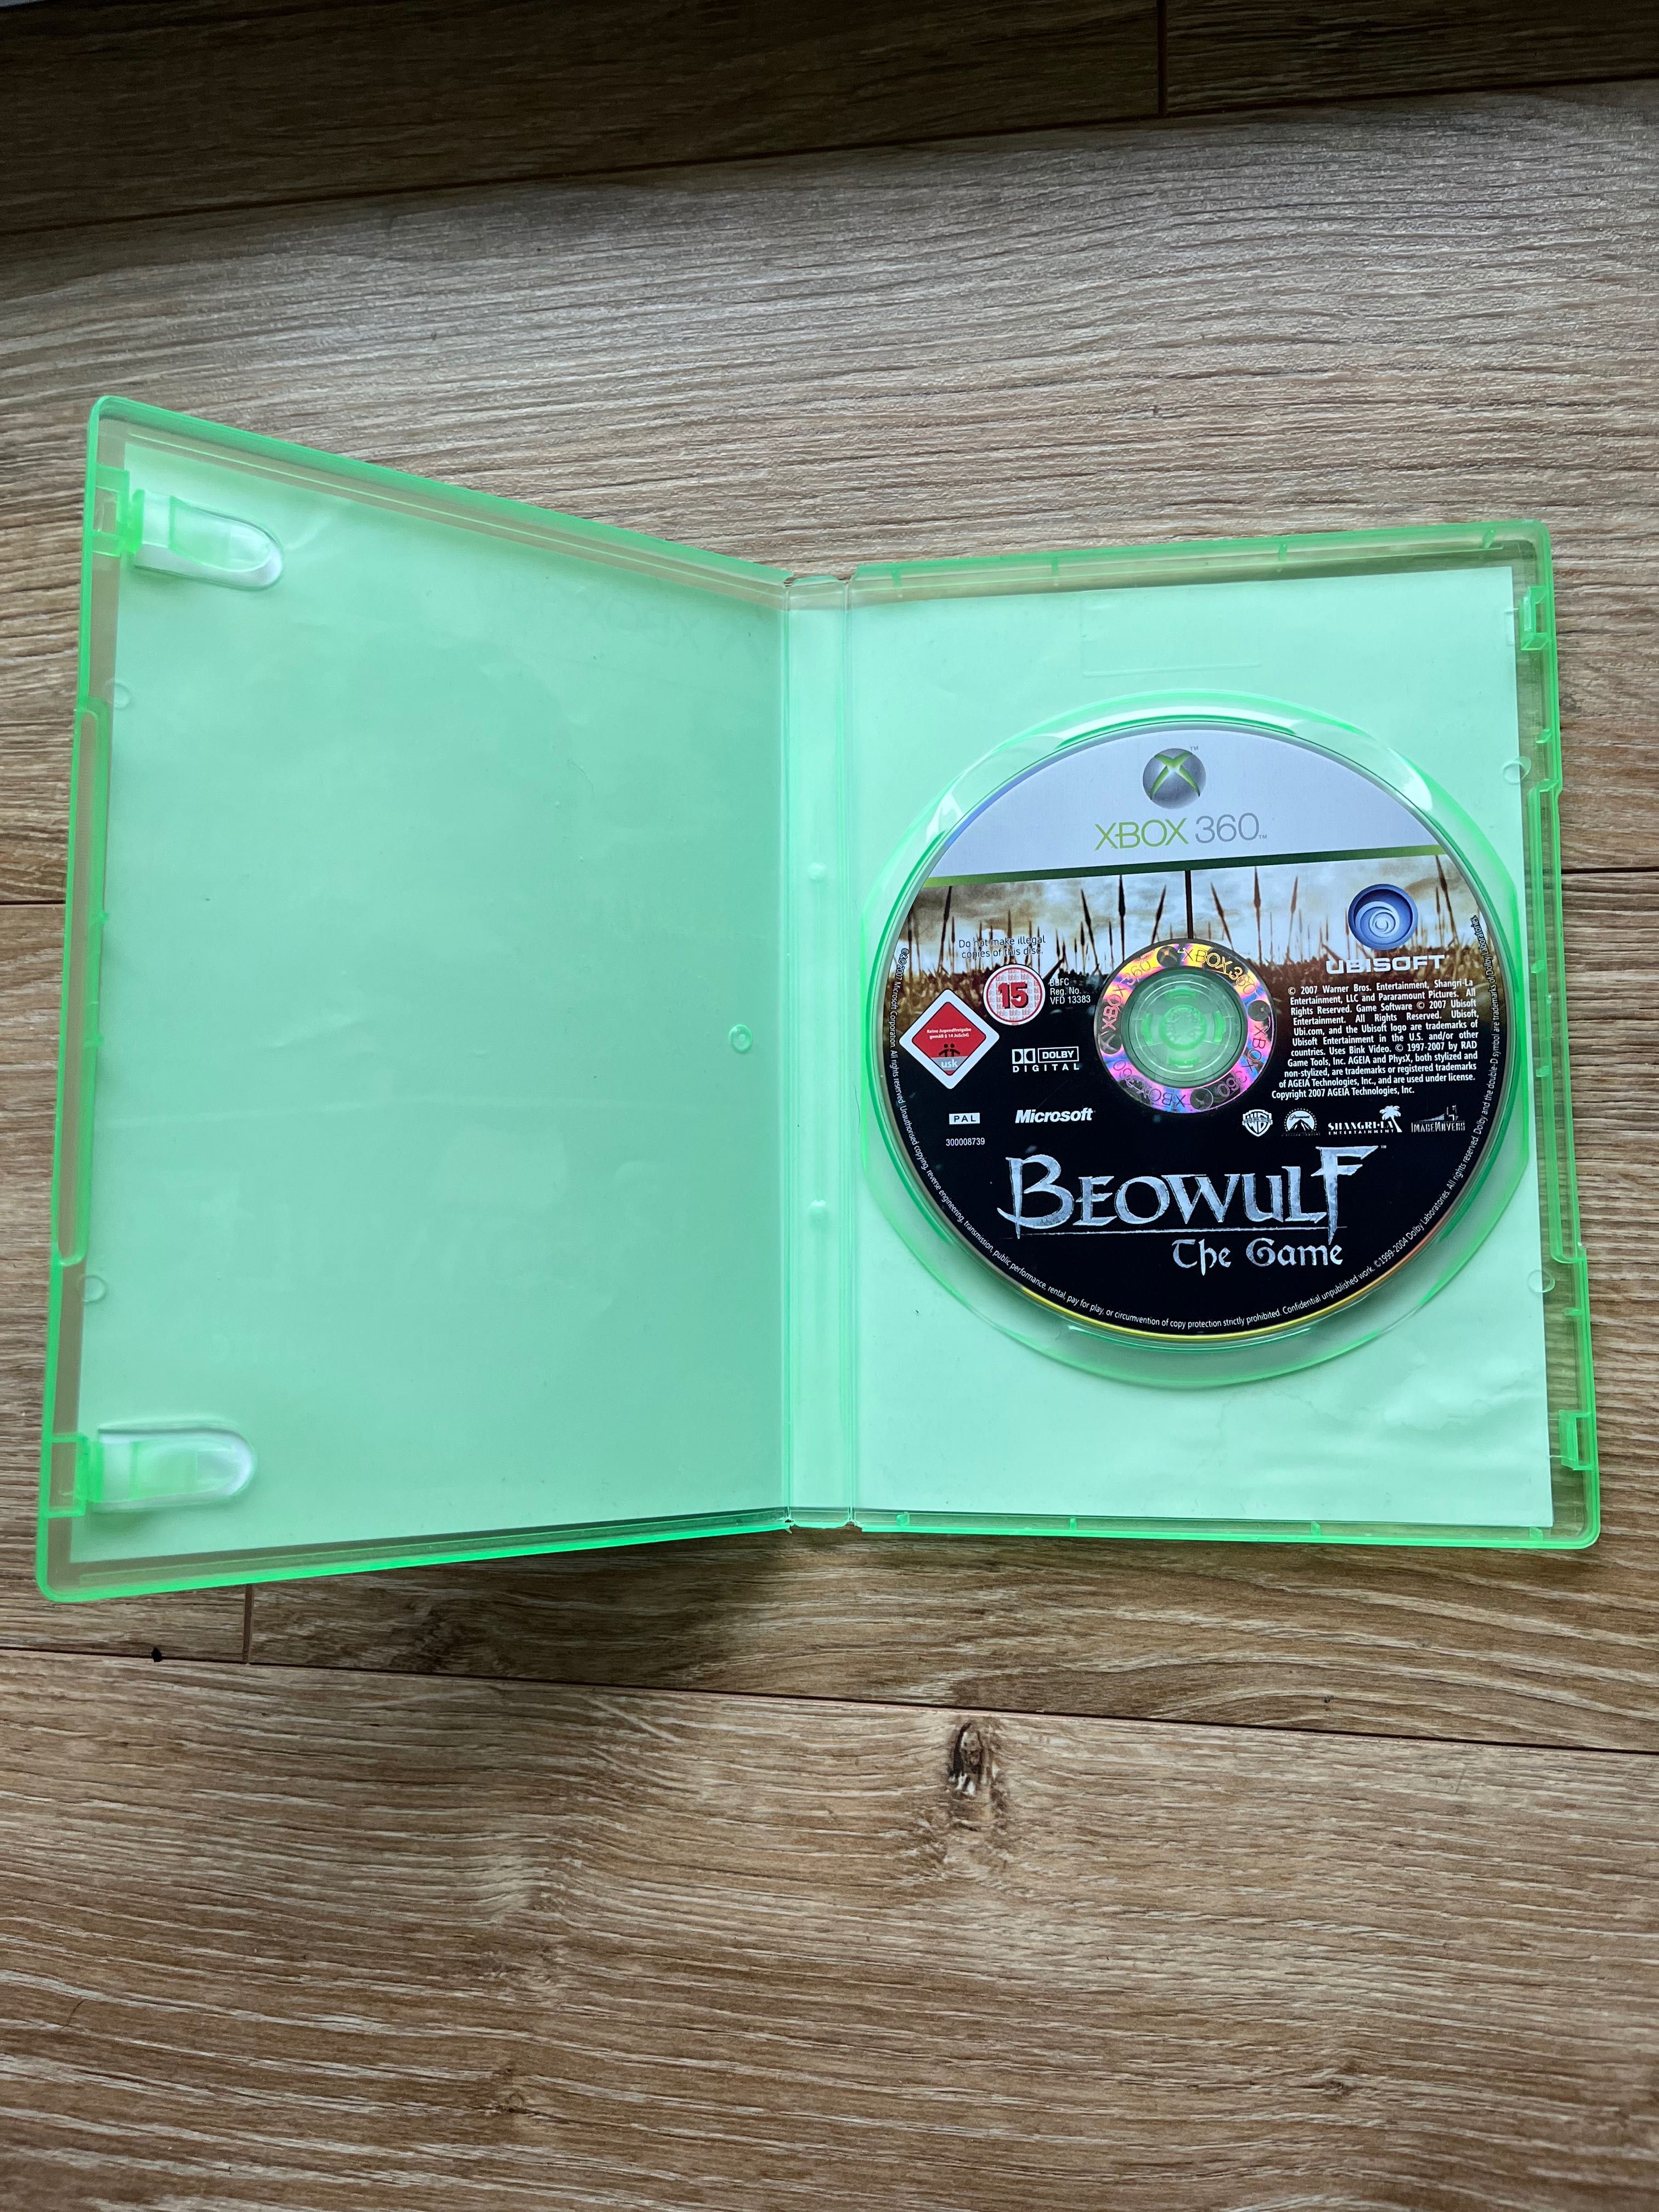 Gra Beowulf The Game Xbox360 Xbox 360